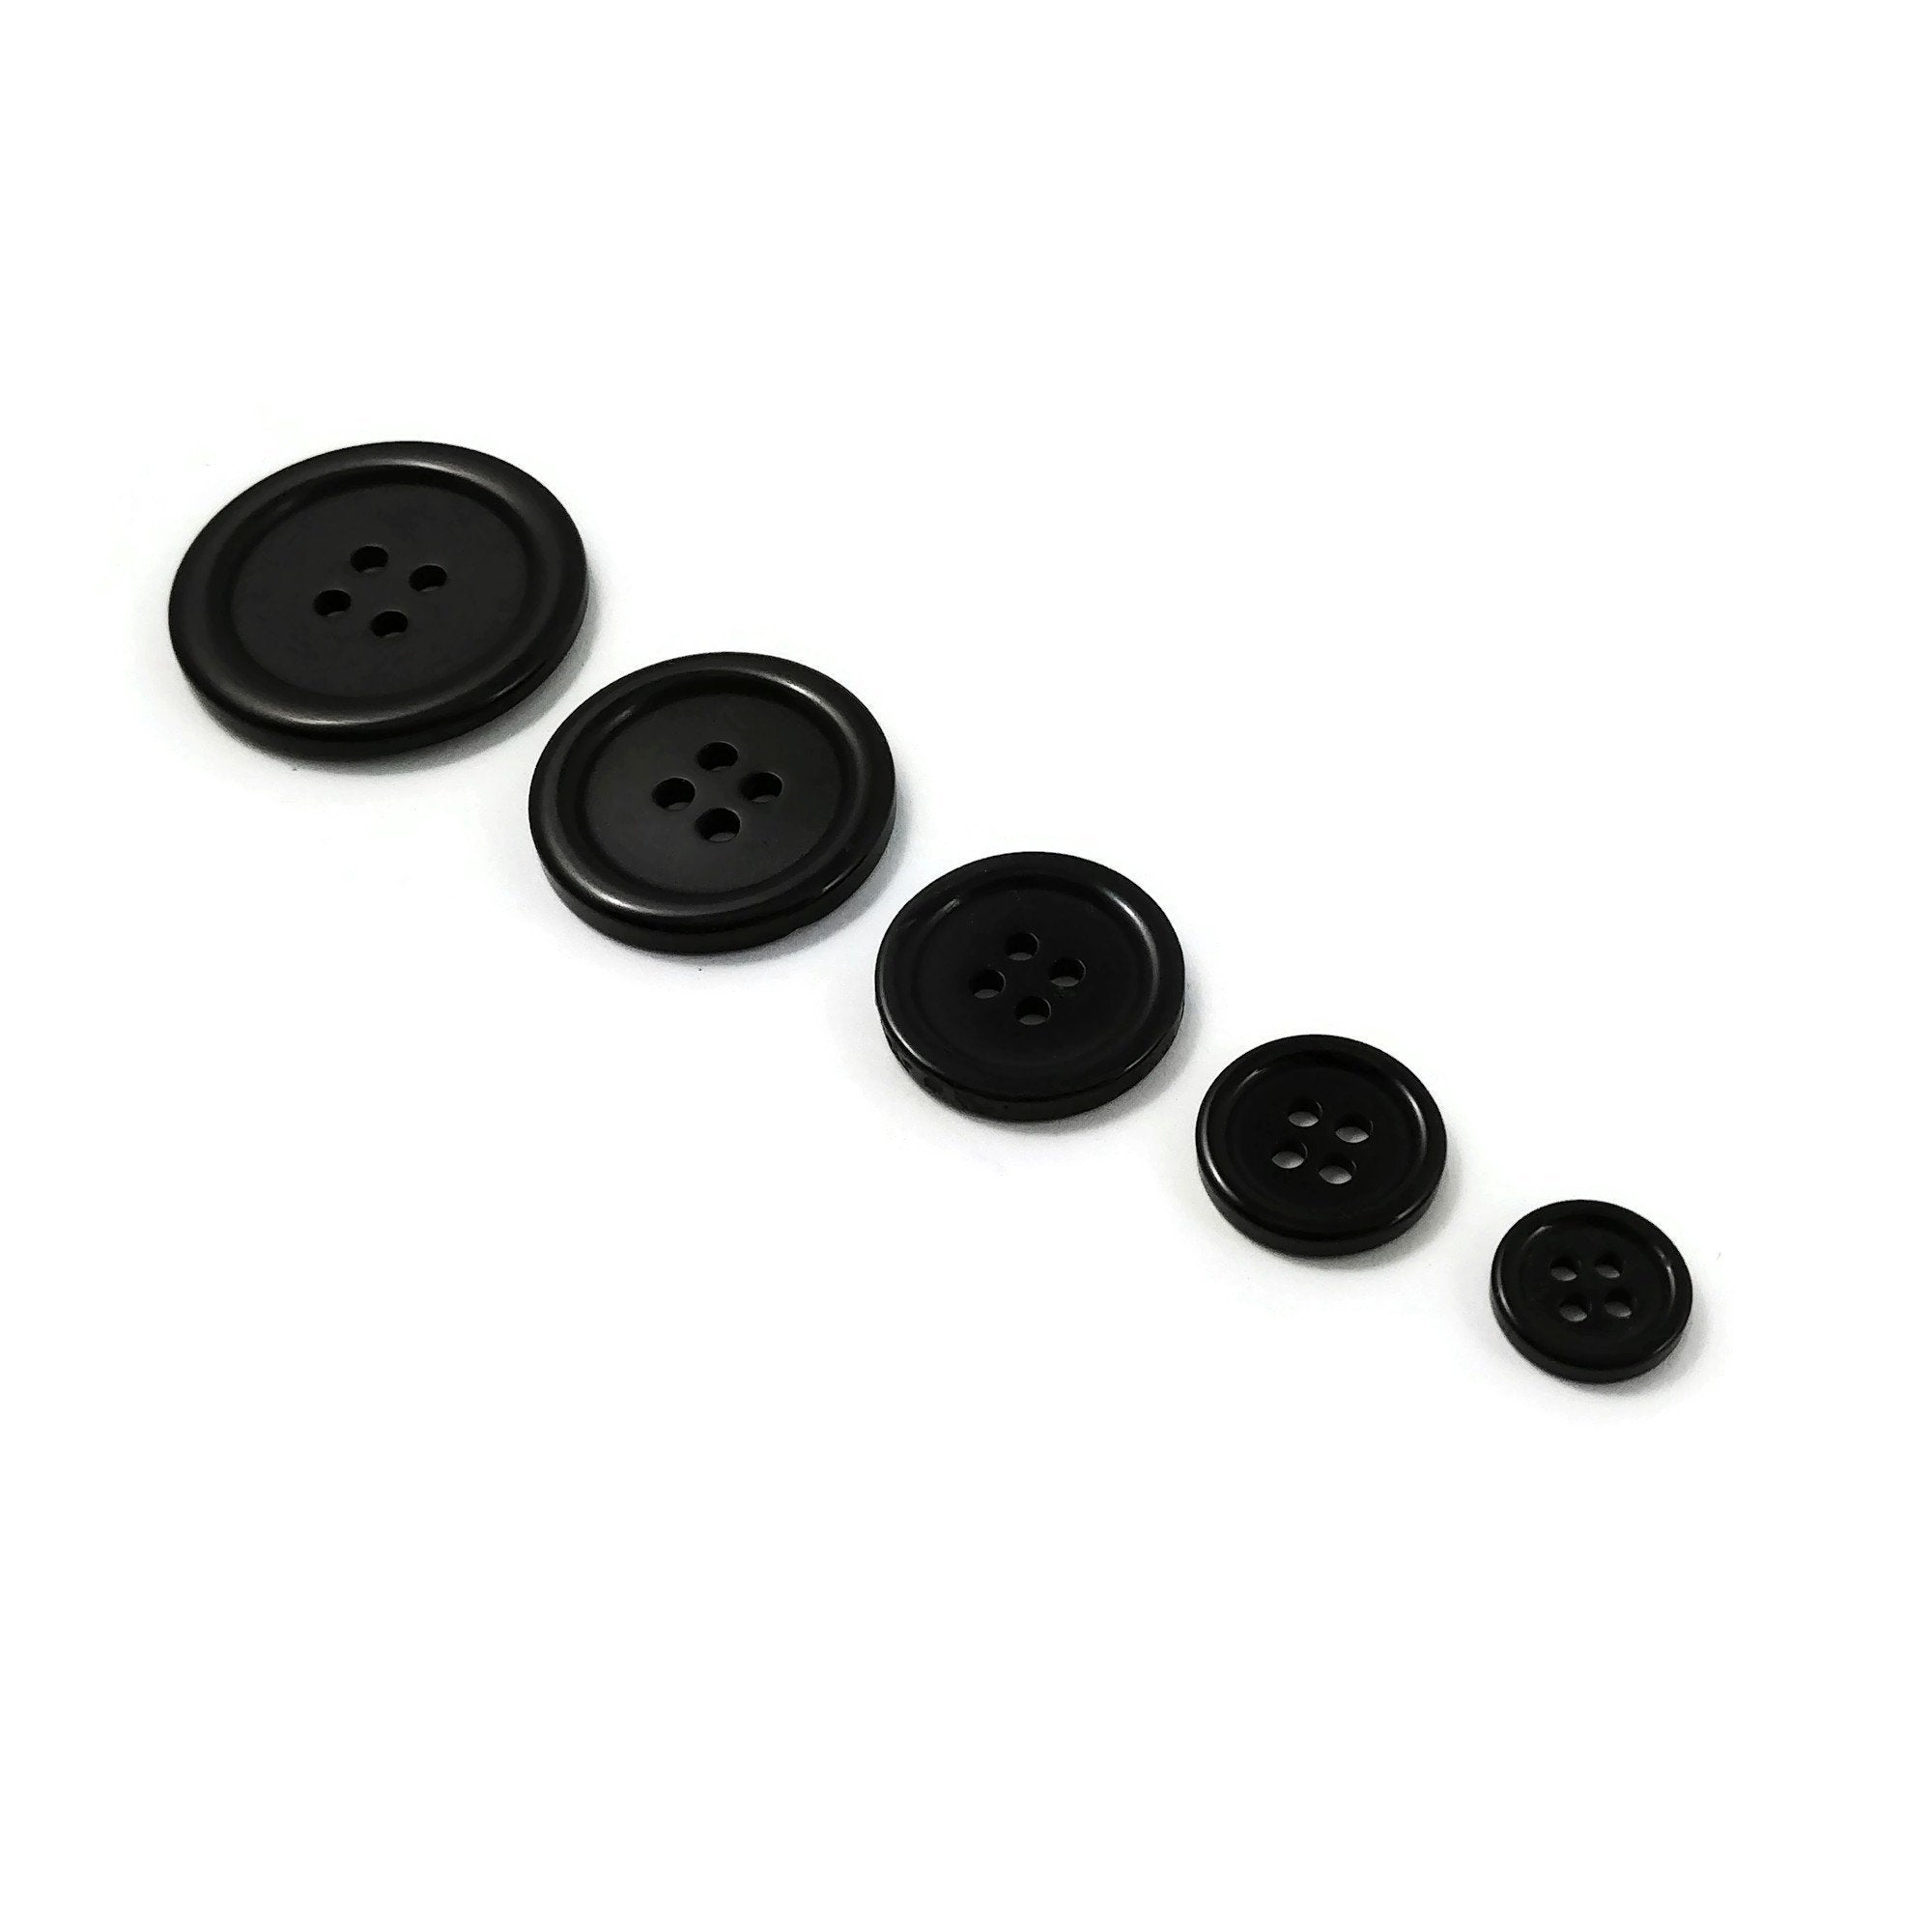 Resin and plastic sewing buttons